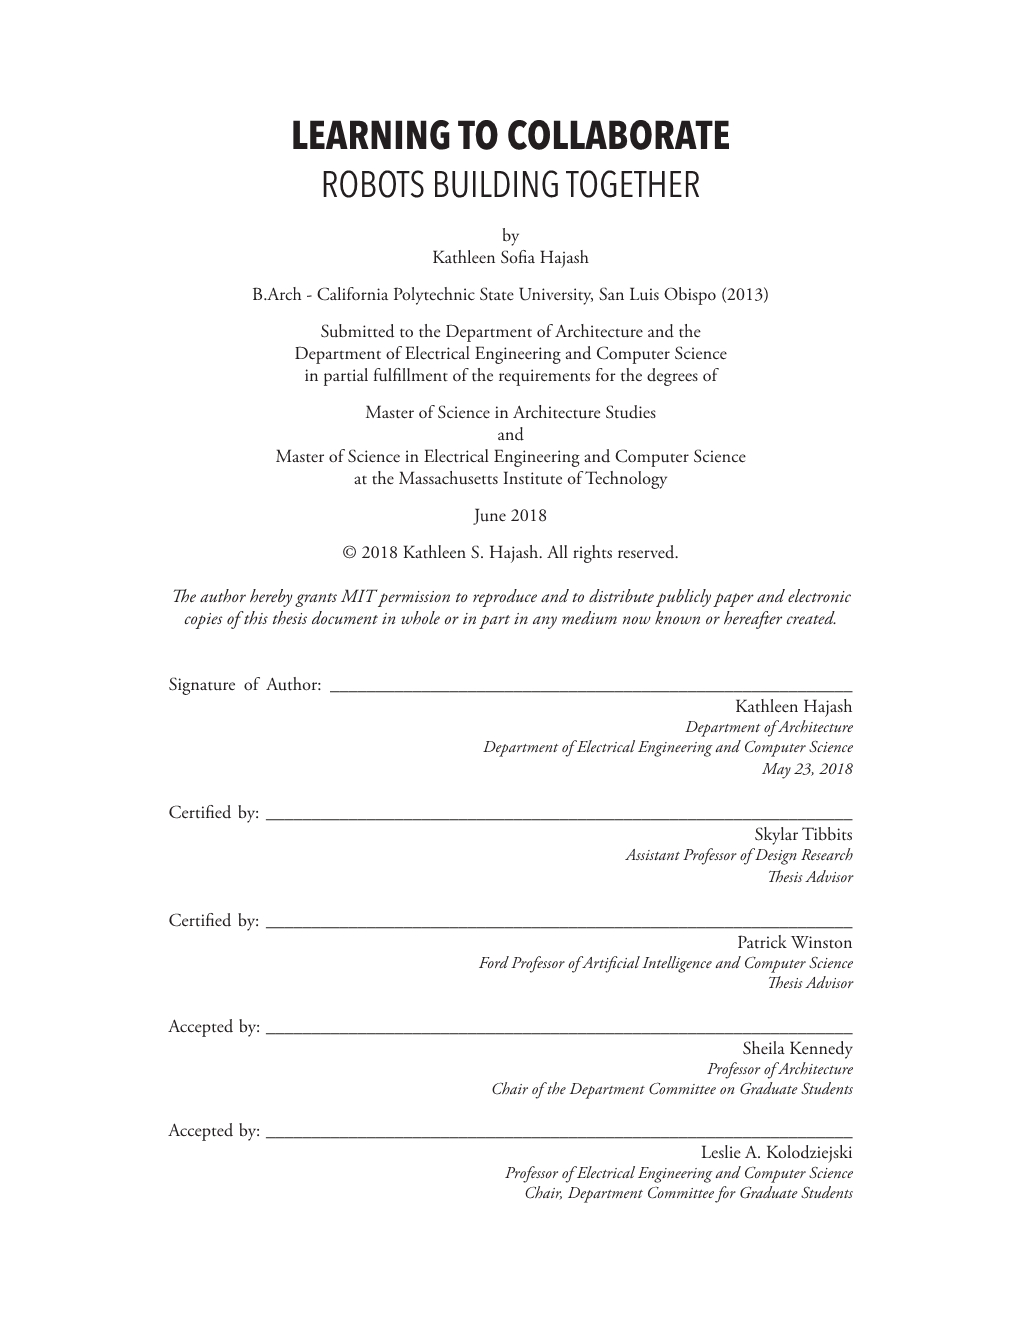 LEARNING to COLLABORATE ROBOTS BUILDING TOGETHER by Kathleen Sofia Hajash